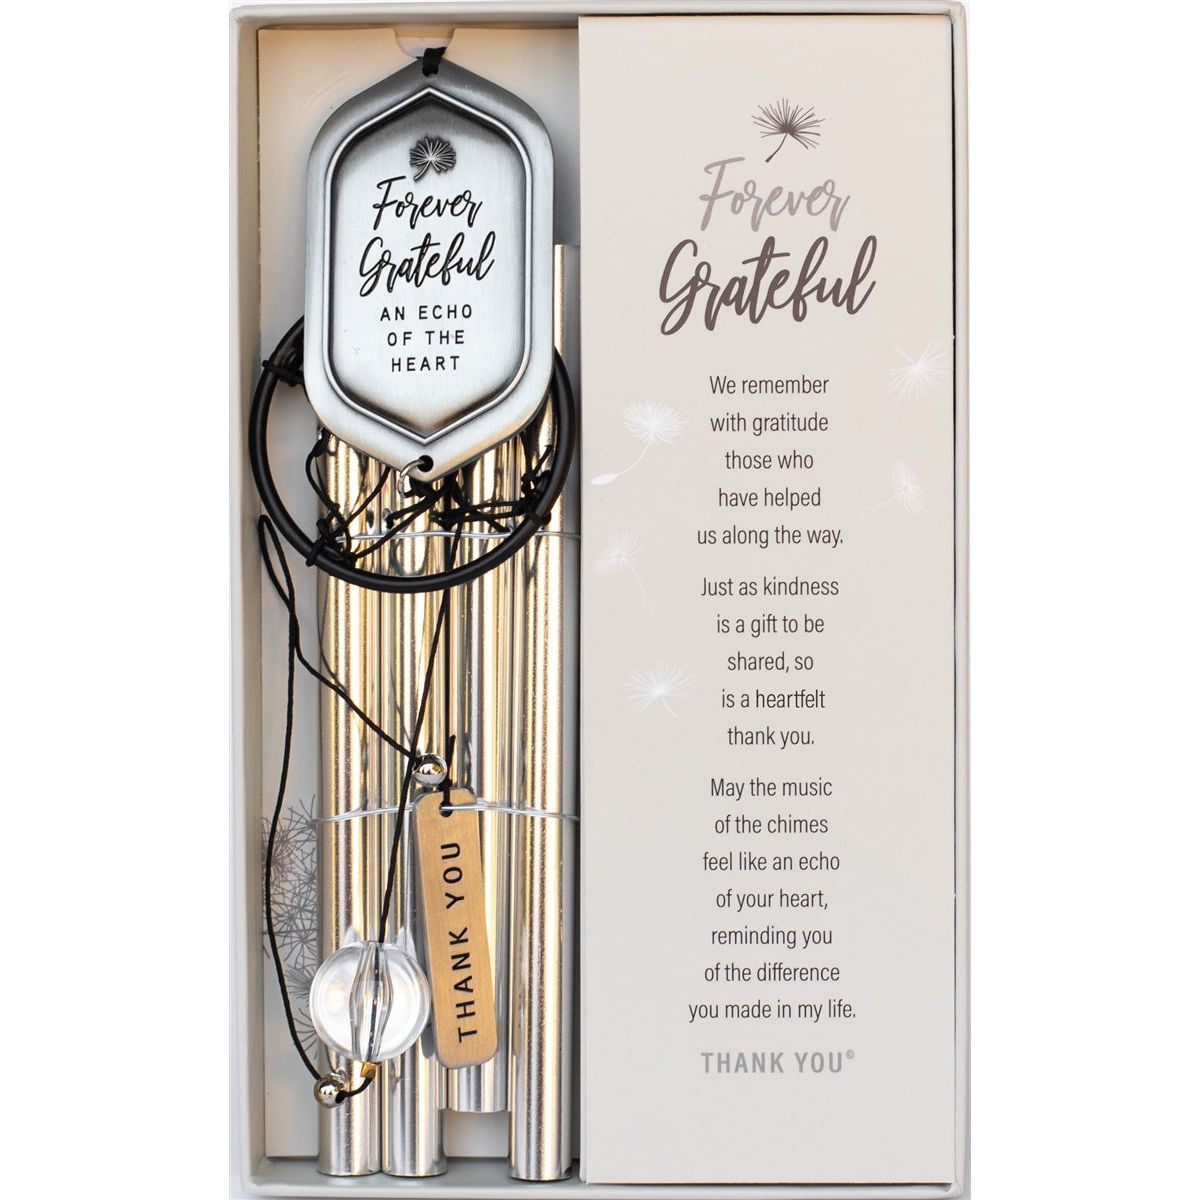 The windchime comes in a high-quality box with the Forever Grateful poem.